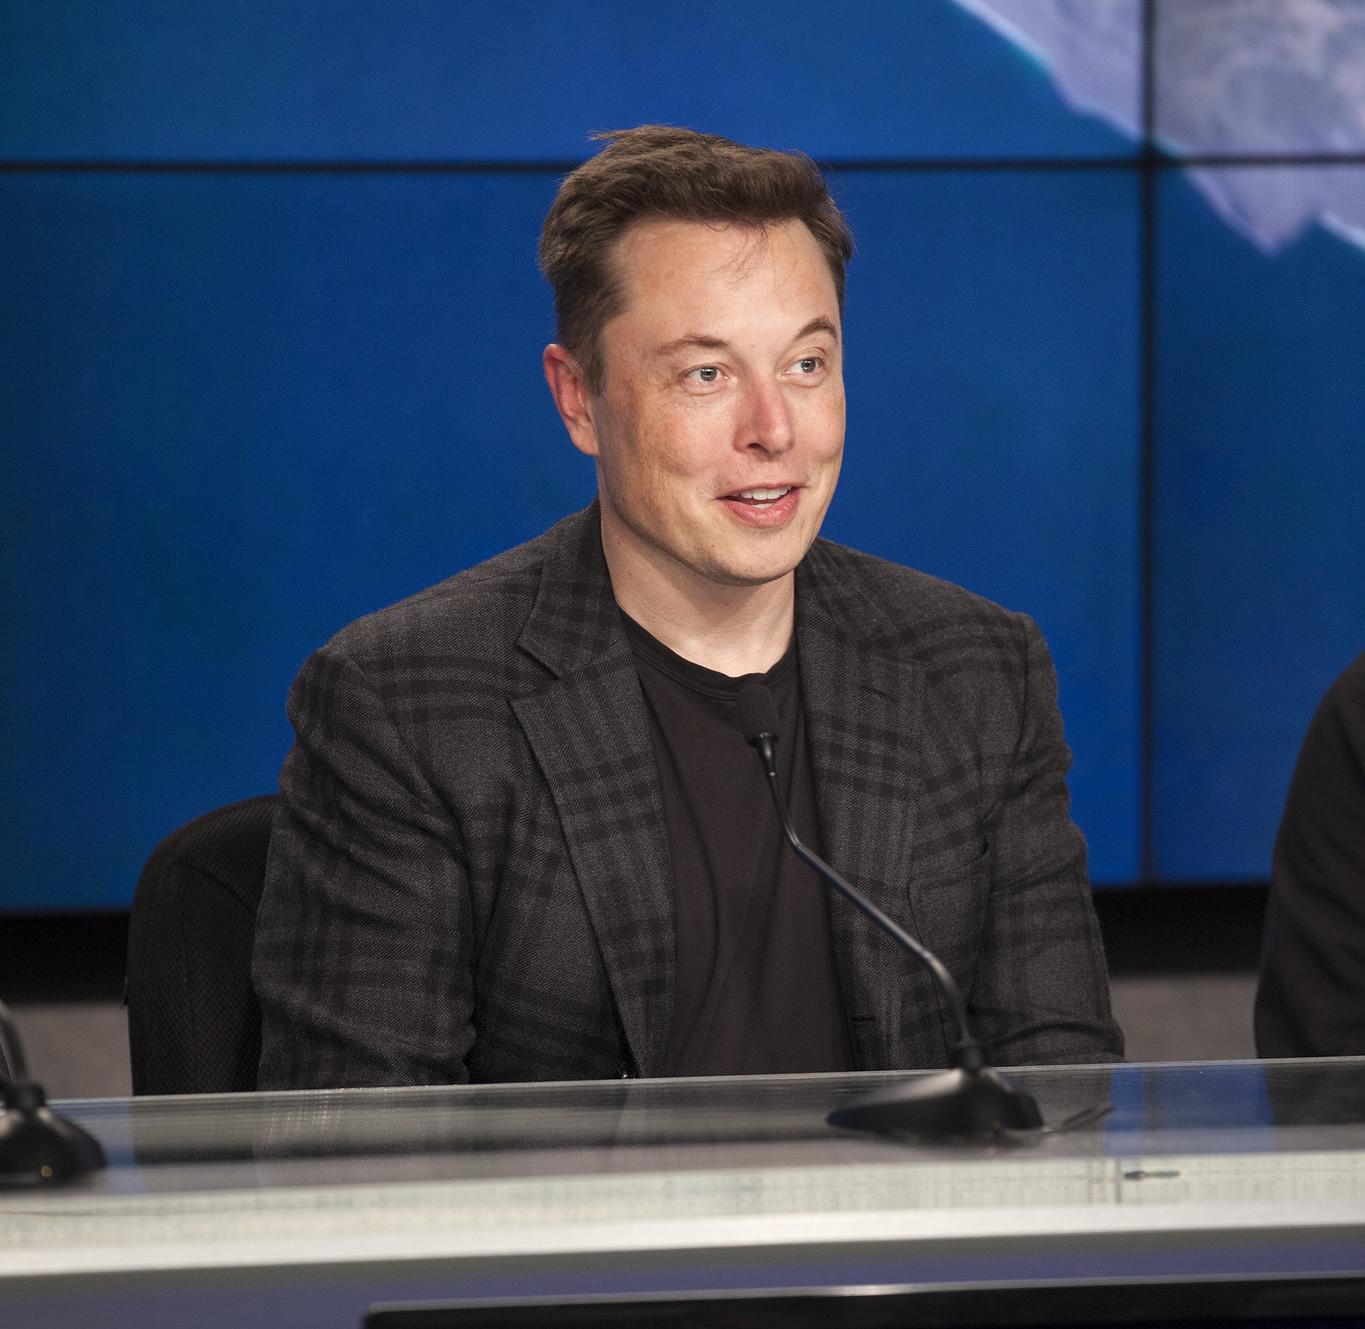 Elon Musk, reply to Anonymous tweeter user after sending him 154 times